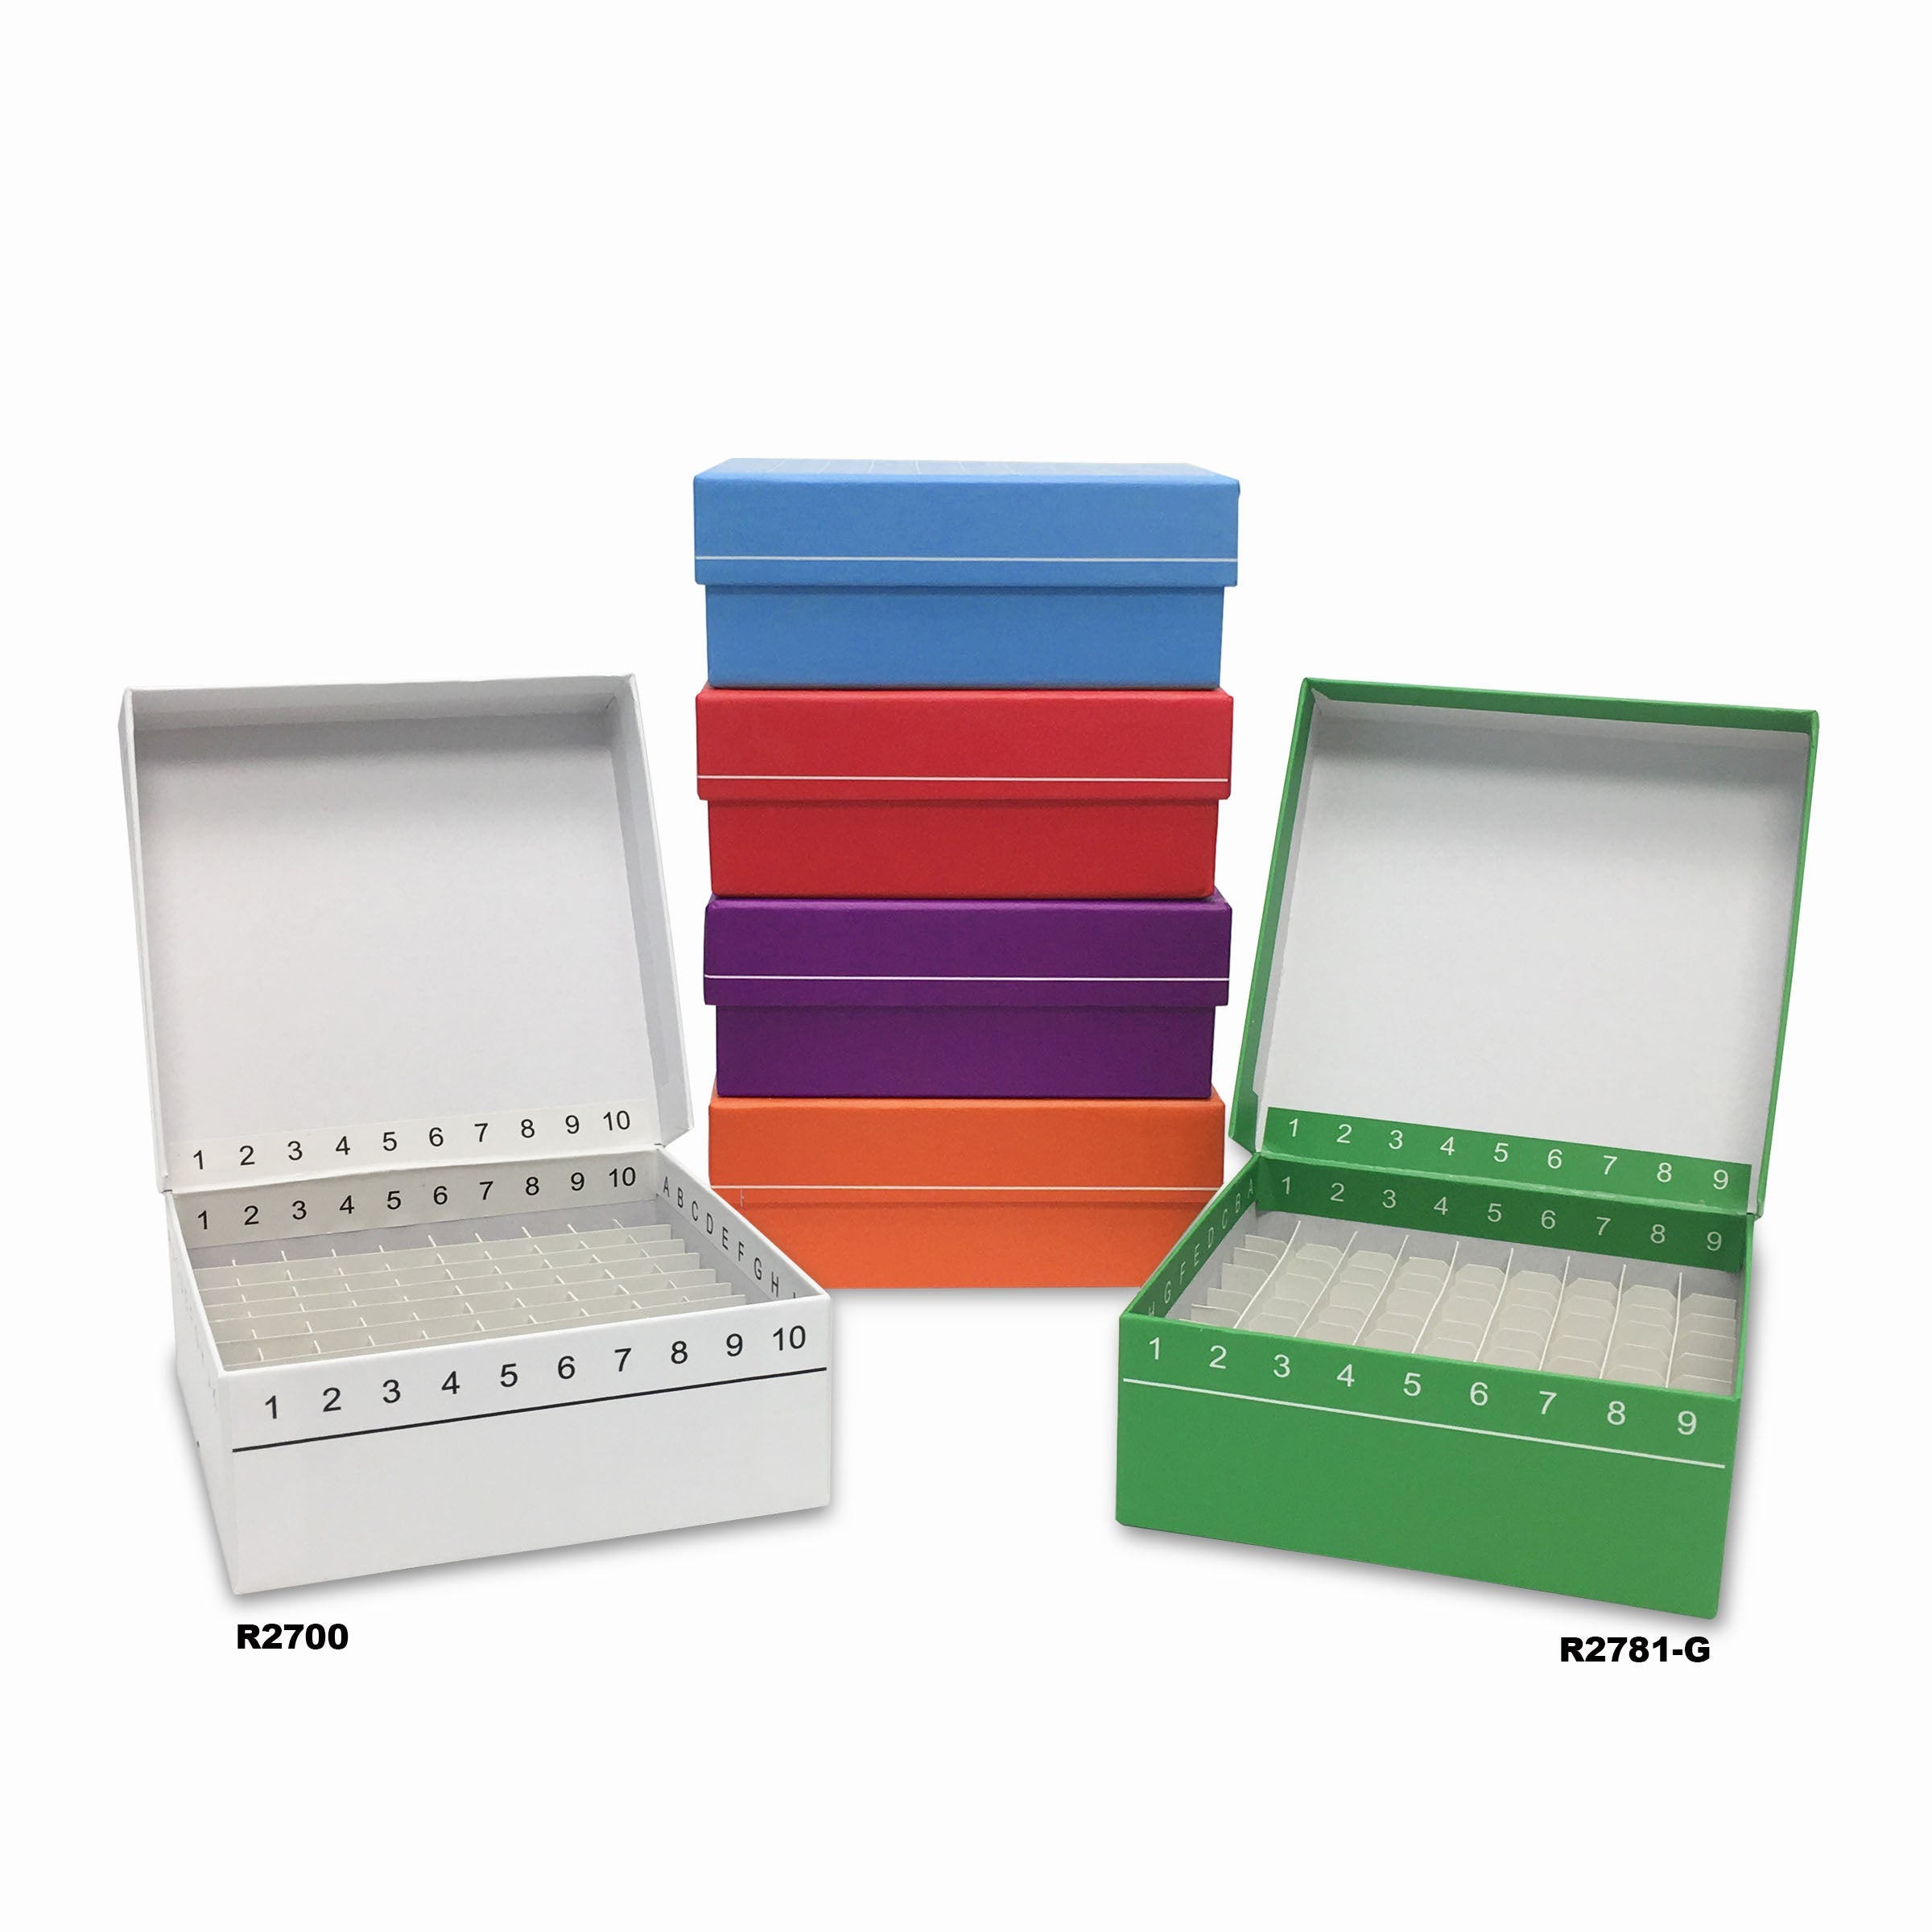 MTC Bio R2781-R, Fliptop Carboard Freezer Box with Attached Hinged Lid, 81-Place, Red, 5/pk